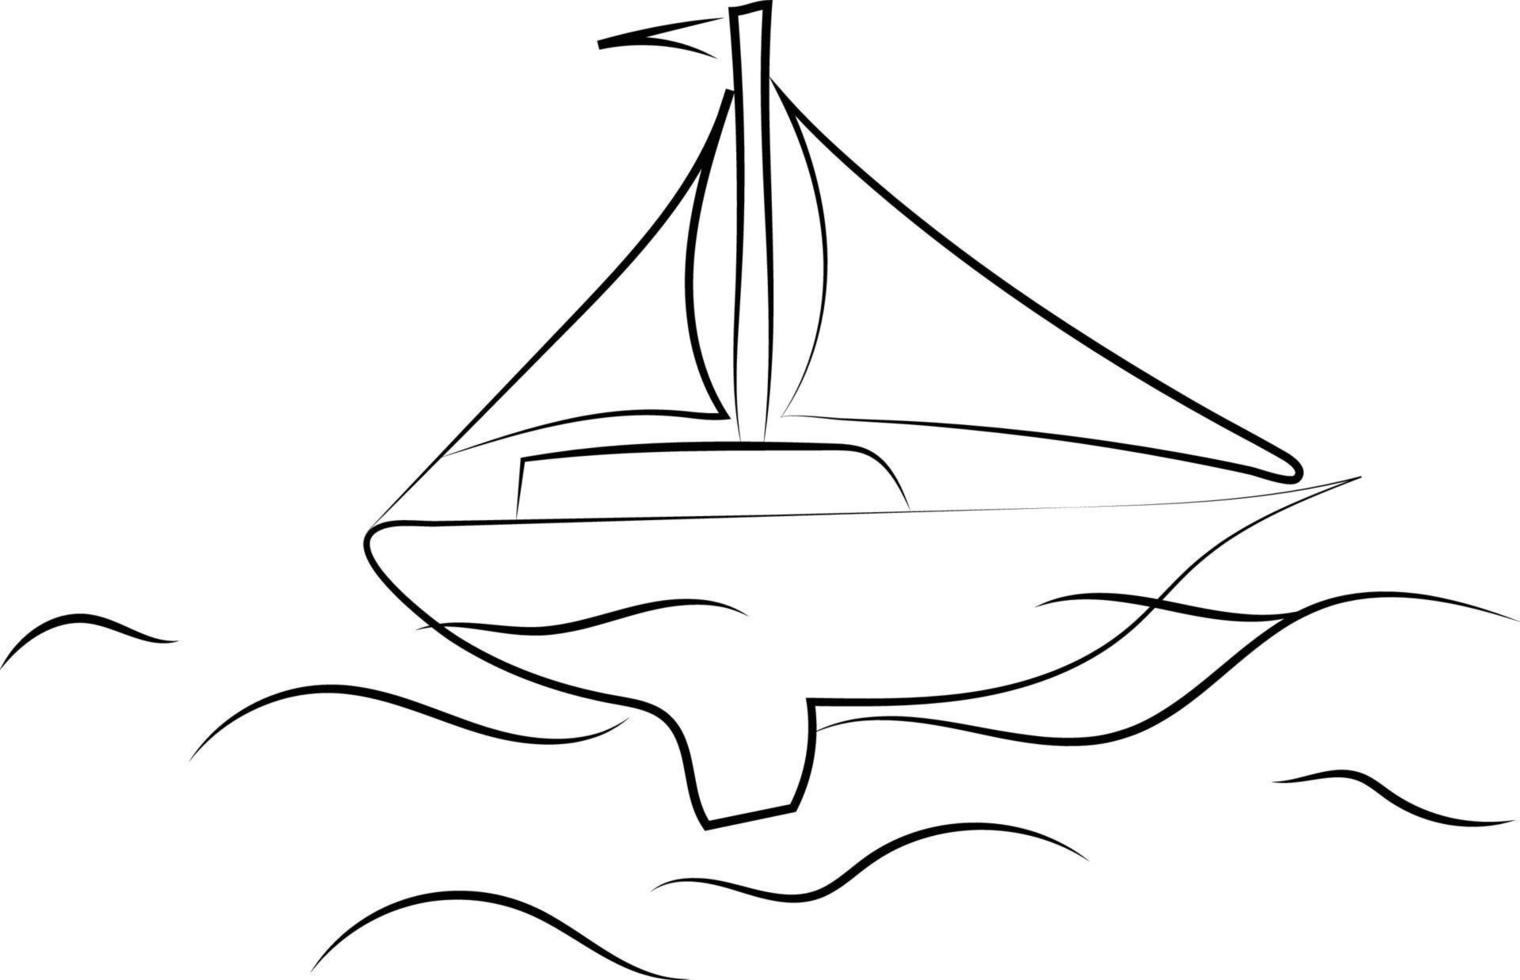 Boat on sea drawing, illustration, vector on white background.